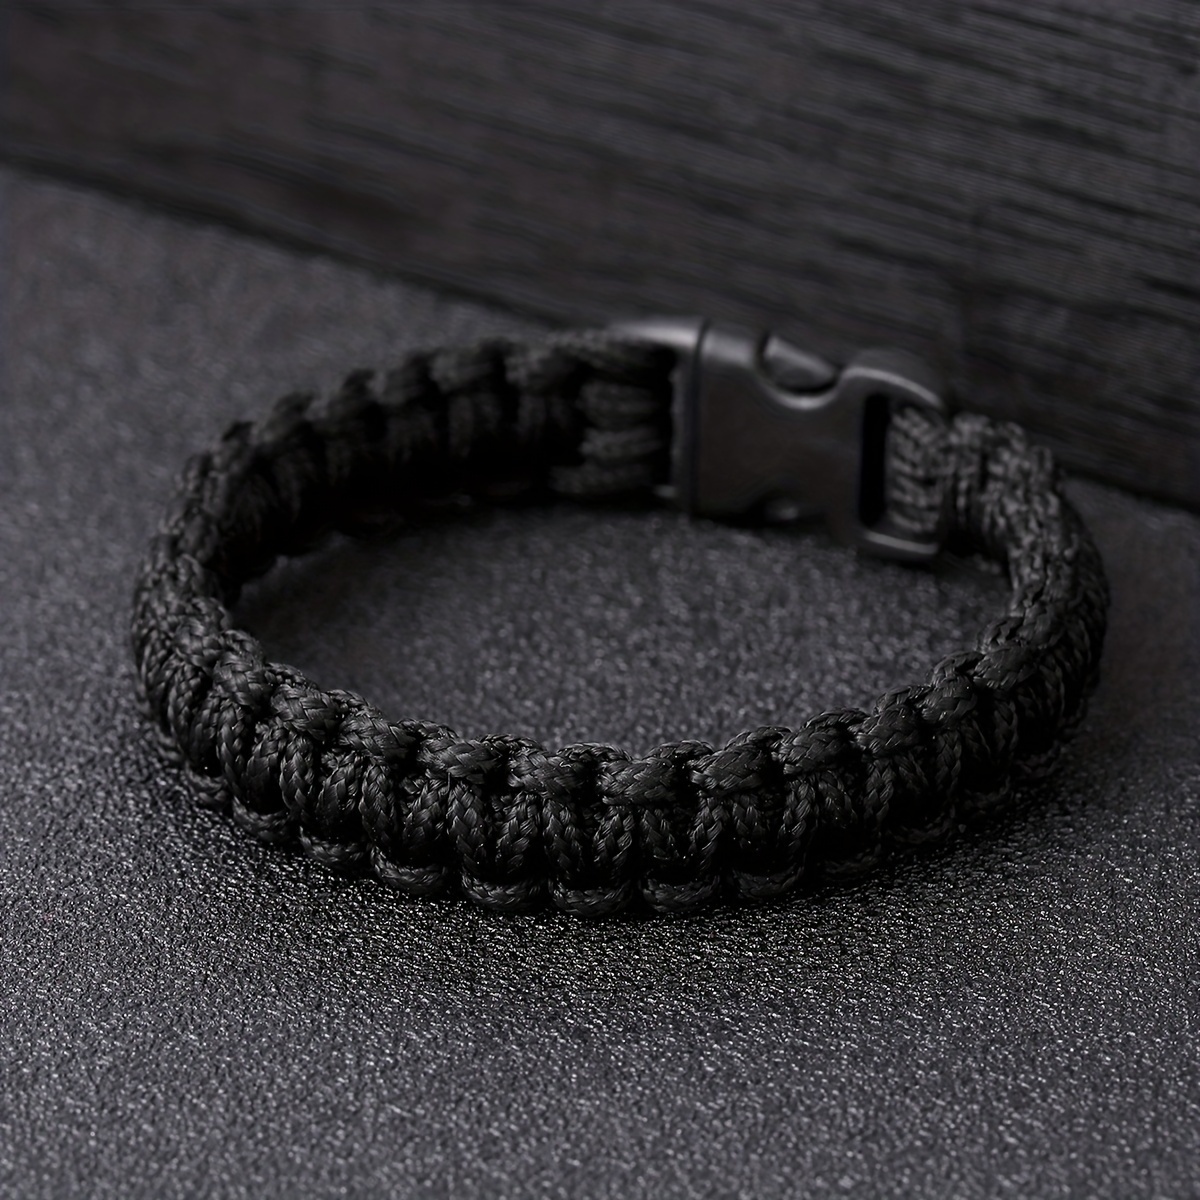 

1pc Trendy Minimalist Braided Bracelet For Men For Daily Decoration, Gift For Family And Friends, Holiday Birthday Gift For Boyfriends/girlfriends, Father's Day Gift